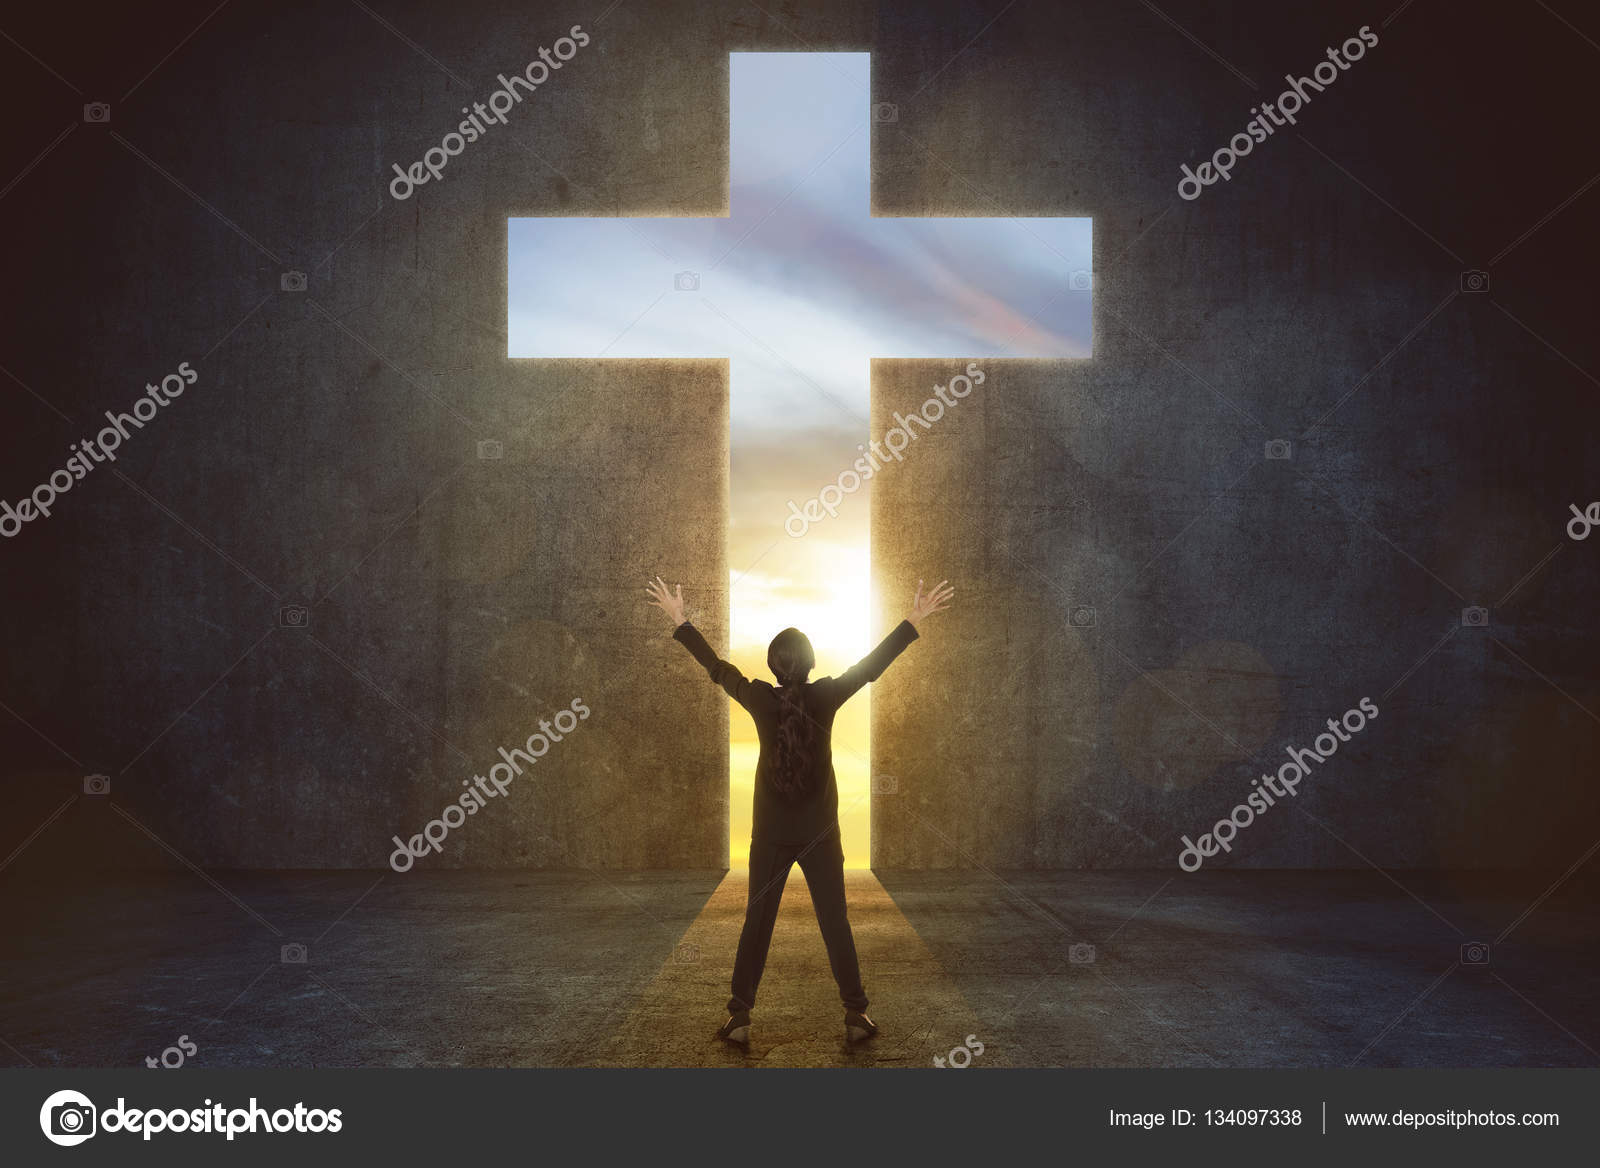 Praise the lord Stock Photos, Royalty Free Praise the lord Images |  Depositphotos